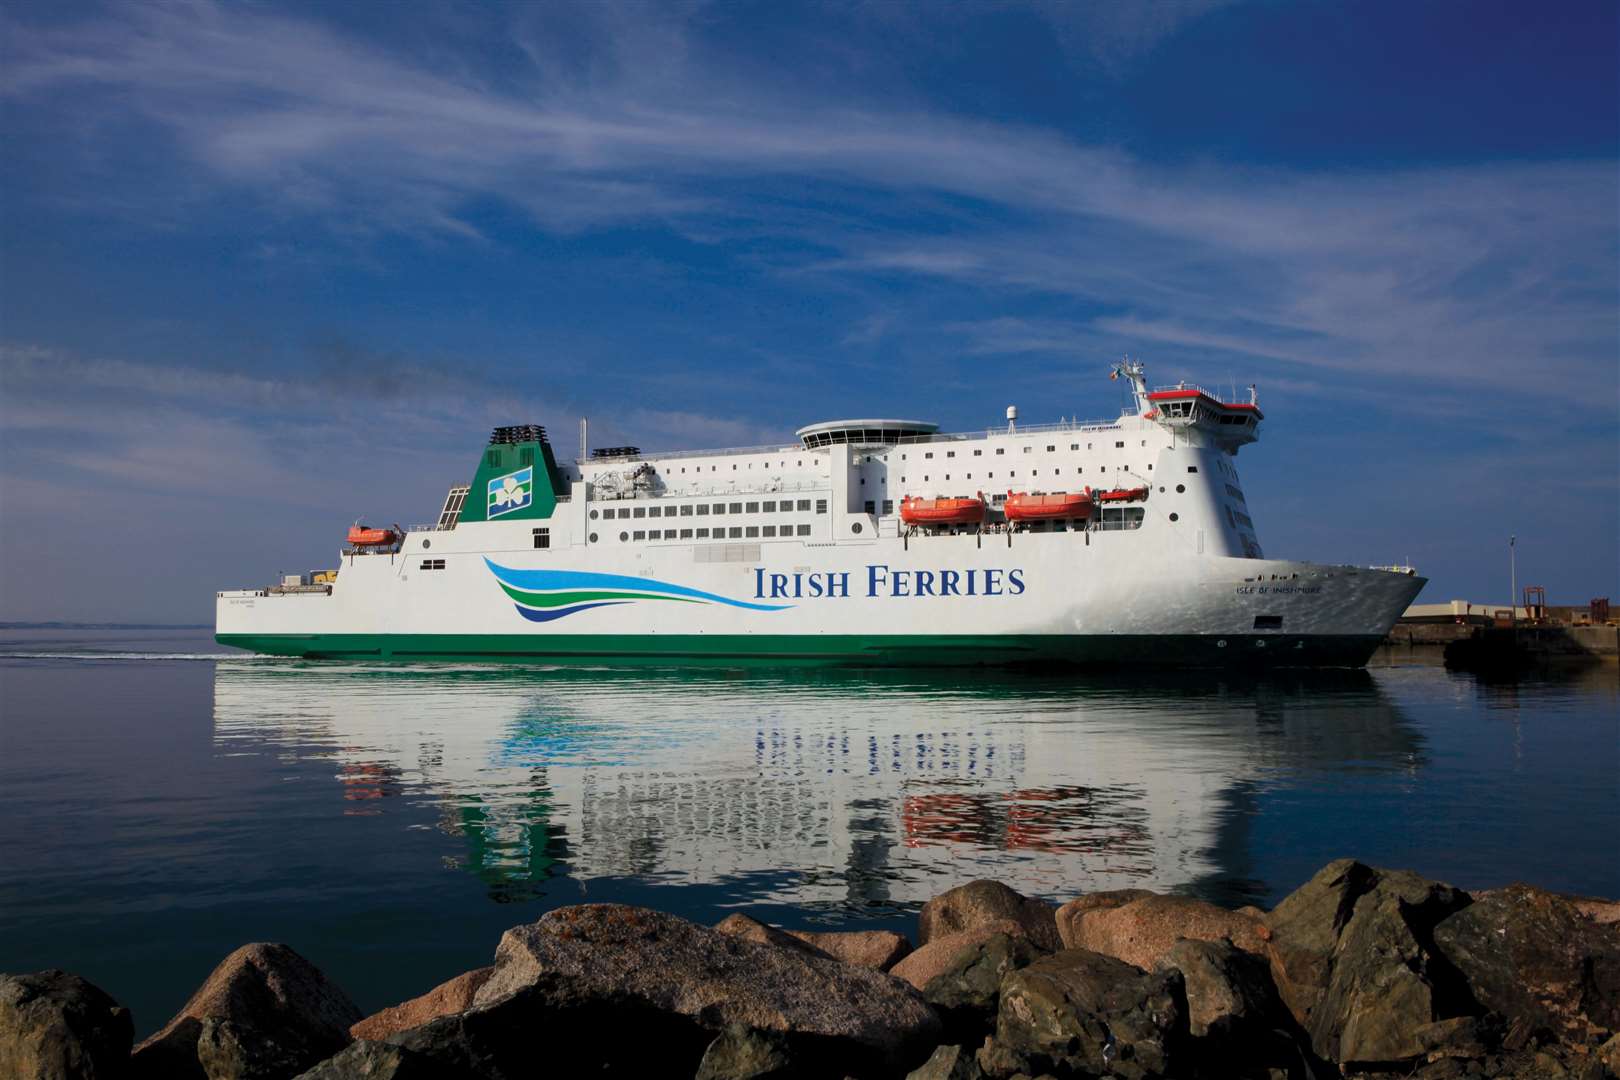 The Isle of Inishmore will operate on the Dover to Calais route